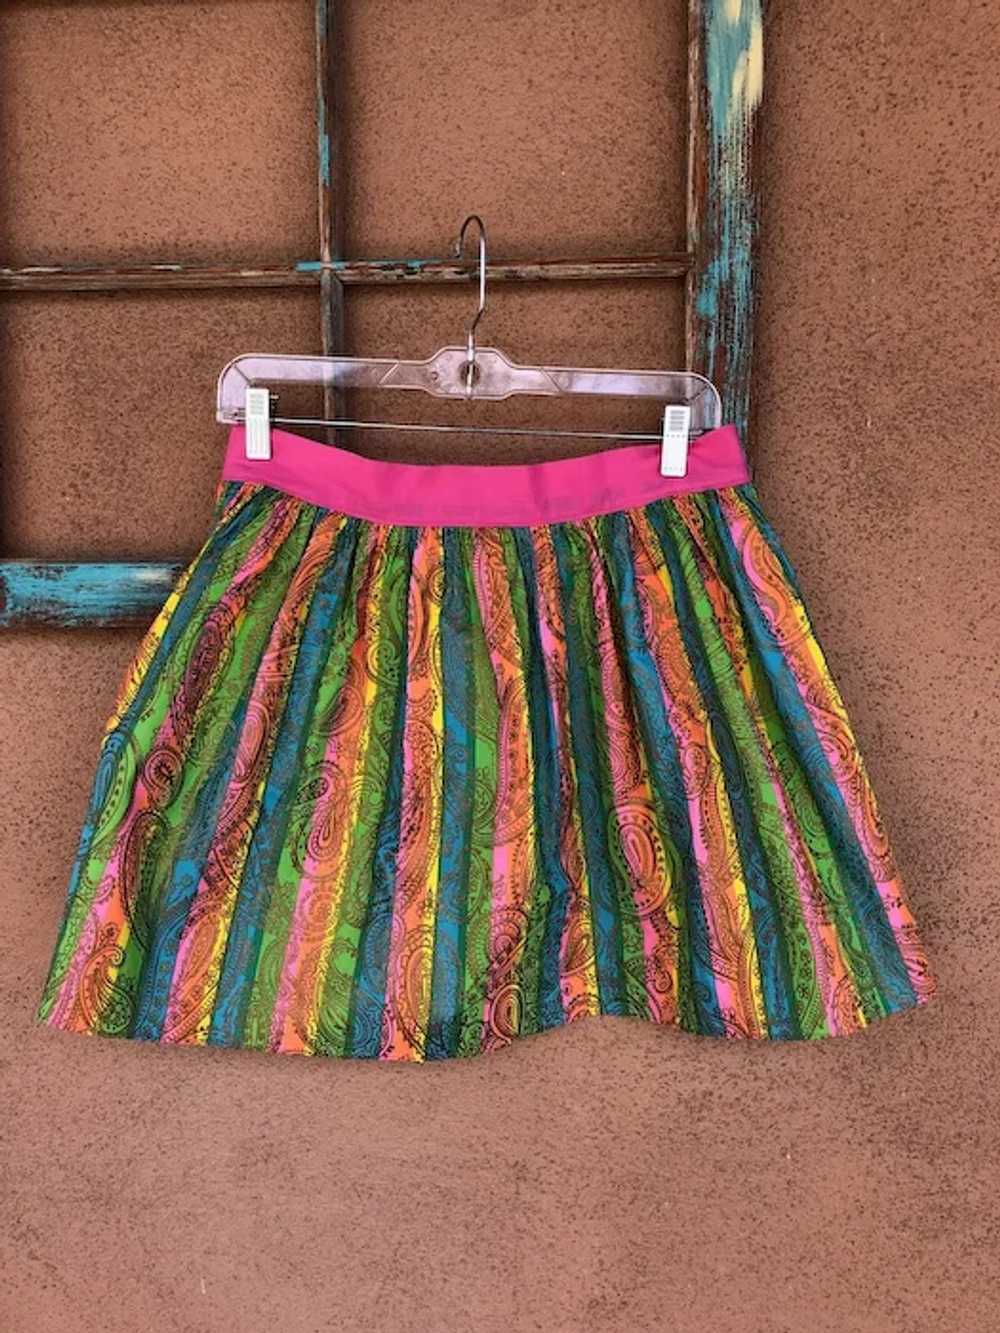 1960s Mod Psychedelic Striped Cotton Apron - image 2